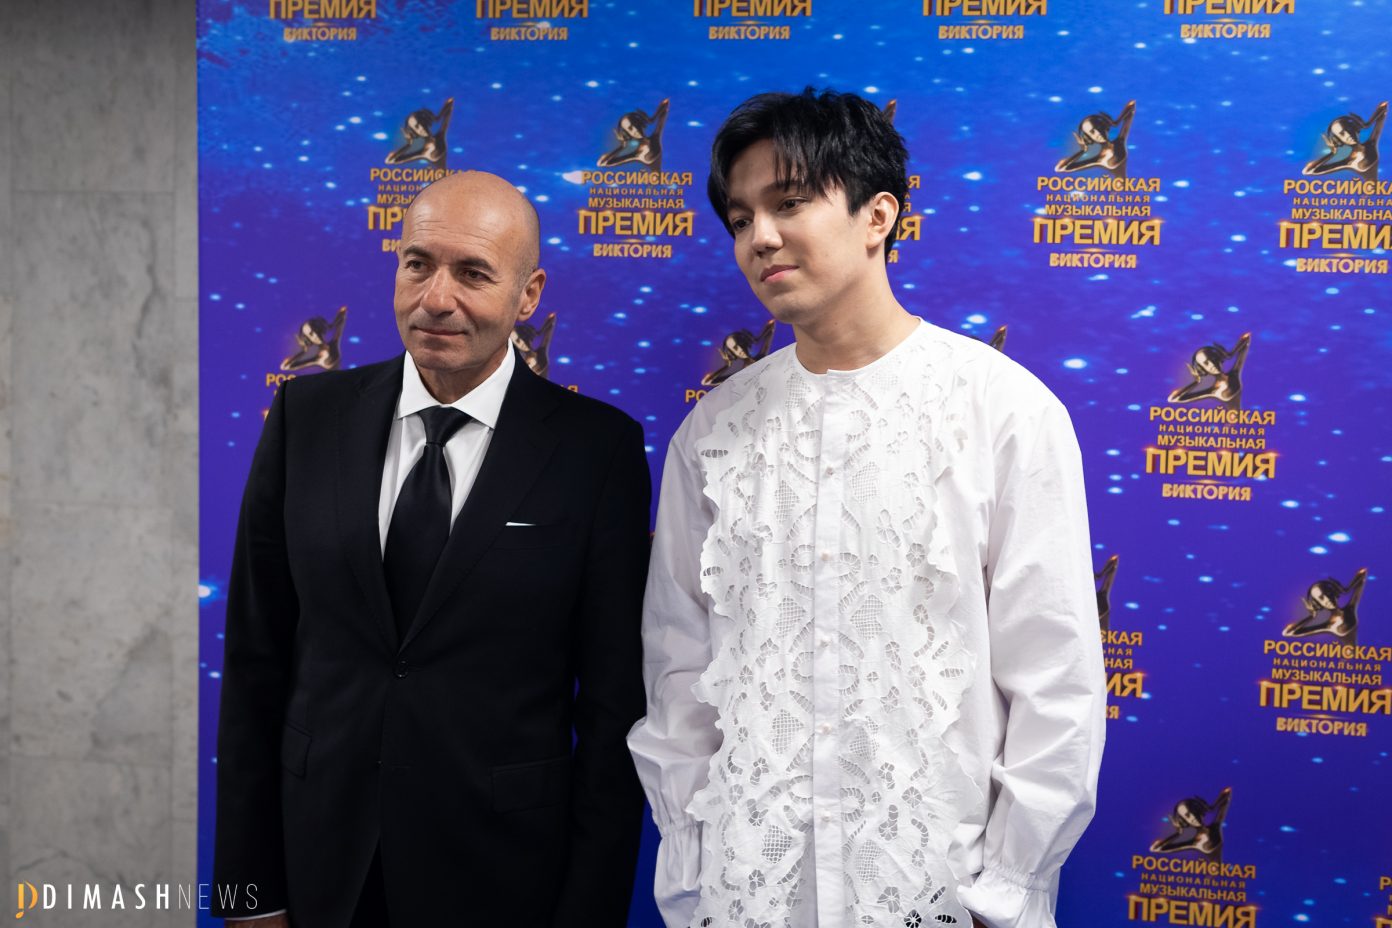 Dimash performed at the 